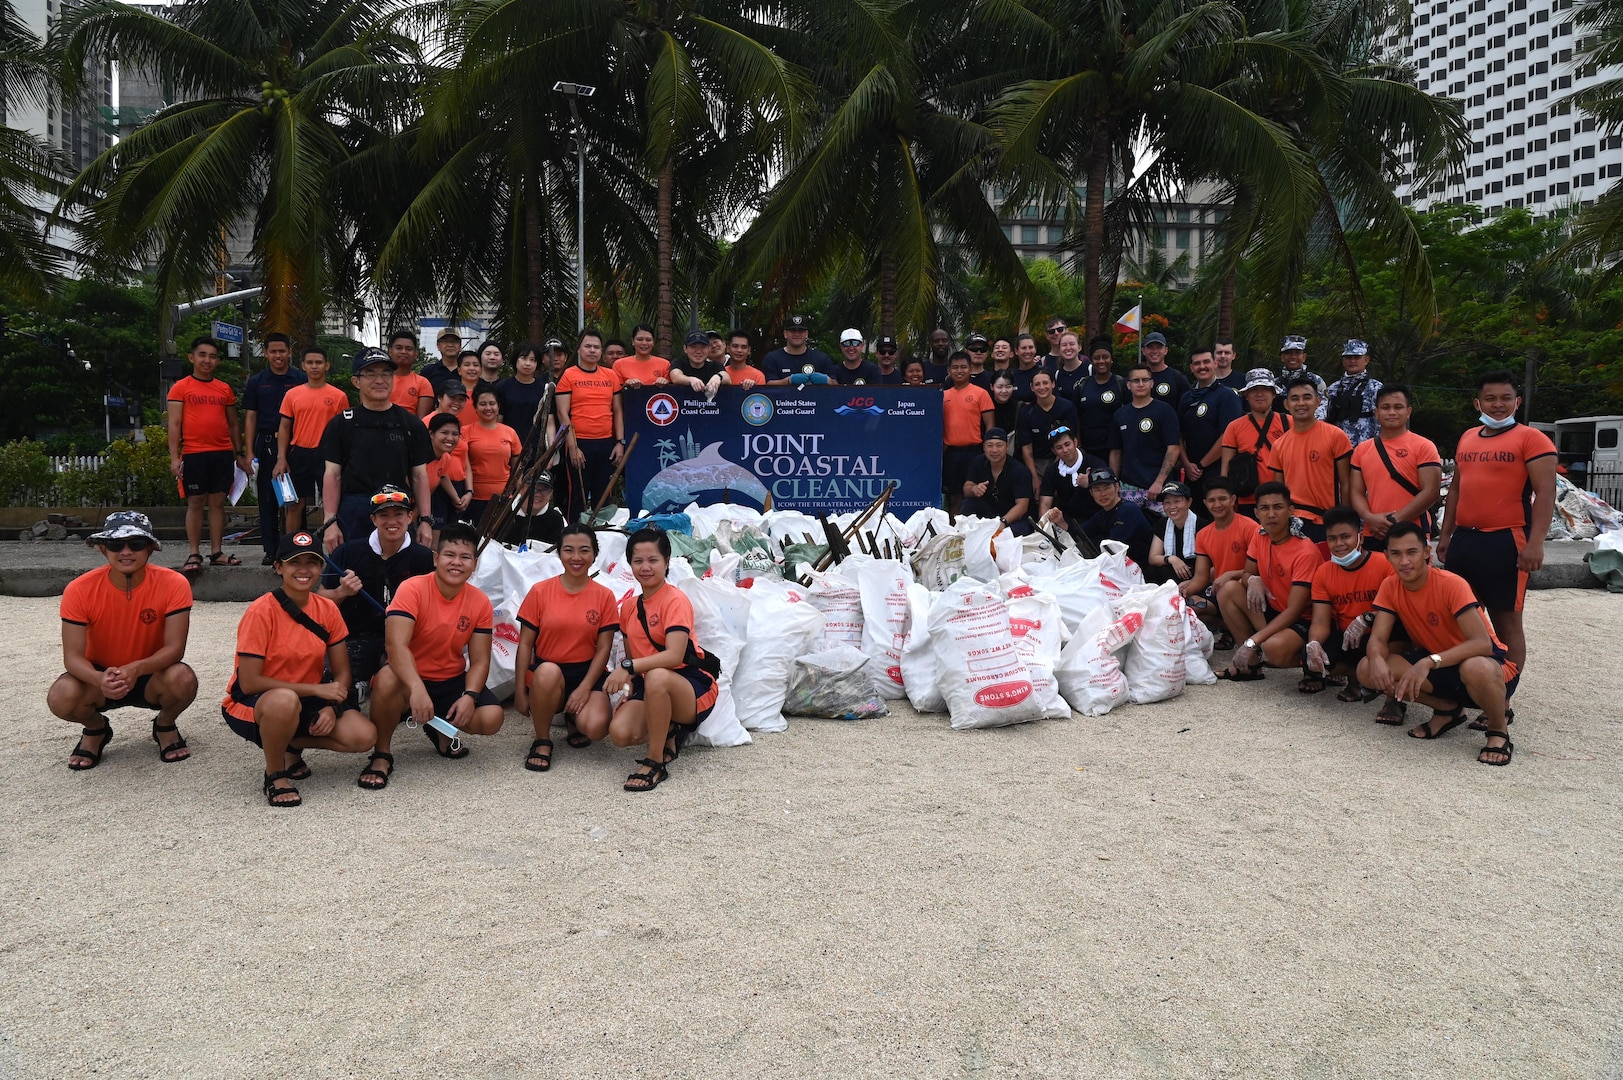 U.S. Coast Guard Cutter Stratton (WMSL 752) servicemembers pose with members from the Japan, and Philippine coast guards next to trash they collectively cleaned up during a community relations event in Manila, Philippines, June 2, 2023. Stratton deployed to the Western Pacific to engage with regional allies and partner nations, reinforcing a rules-based order and maritime governance to promote a free and open Indo-Pacific. (U.S. Coast Guard photo by Chief Petty Officer Matt Masaschi)